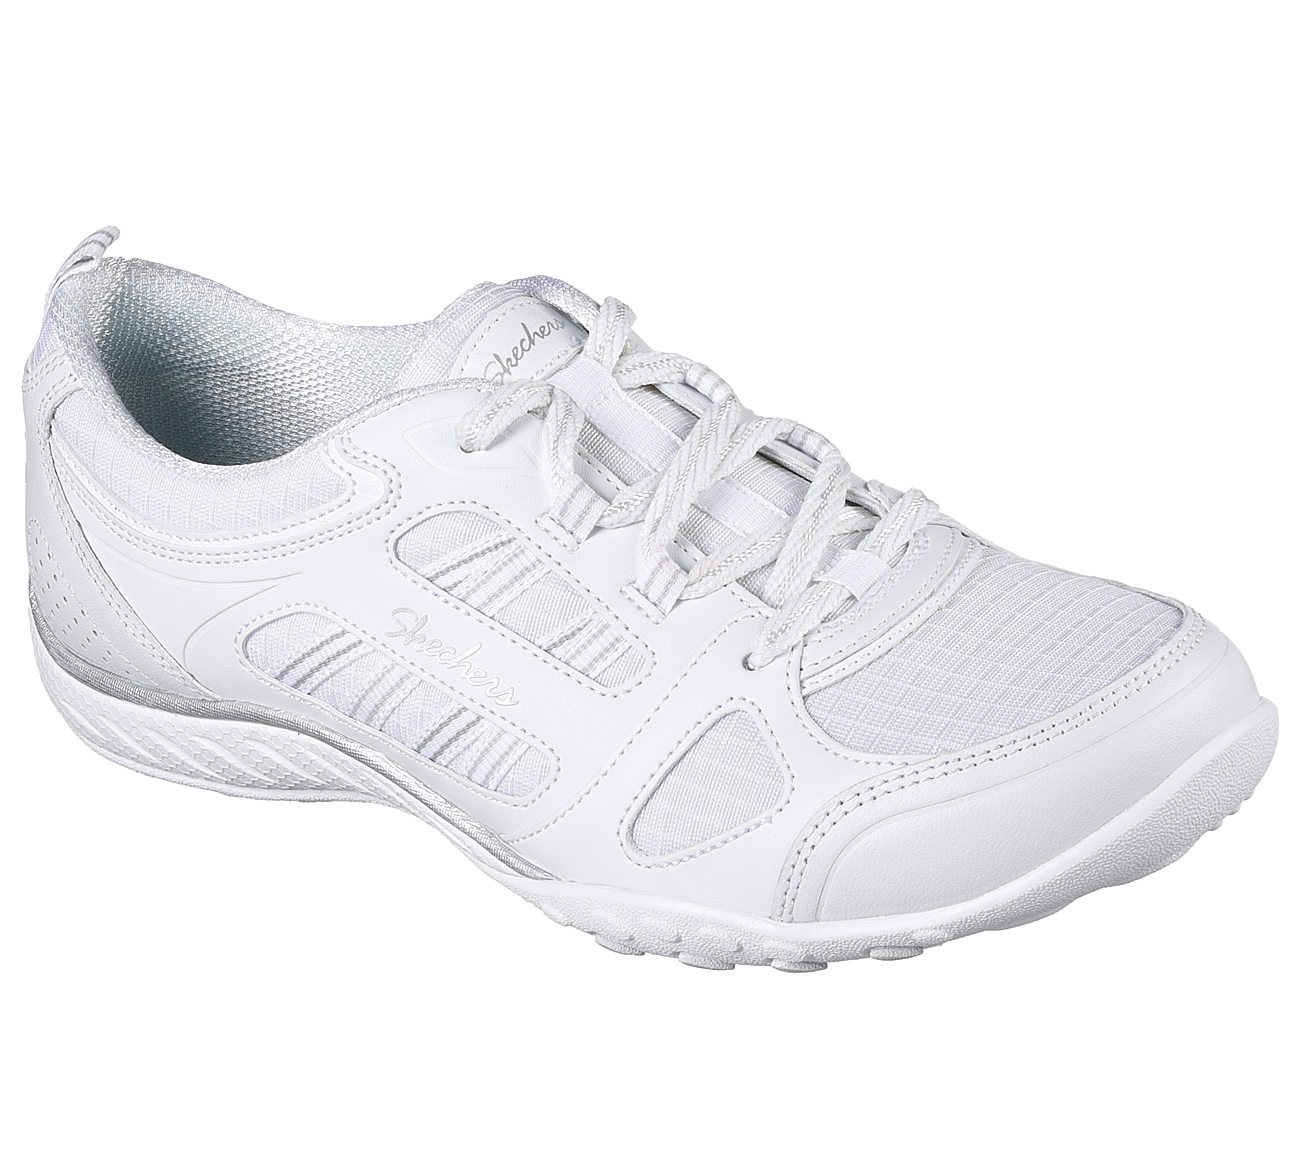 skechers the shoes that breathe